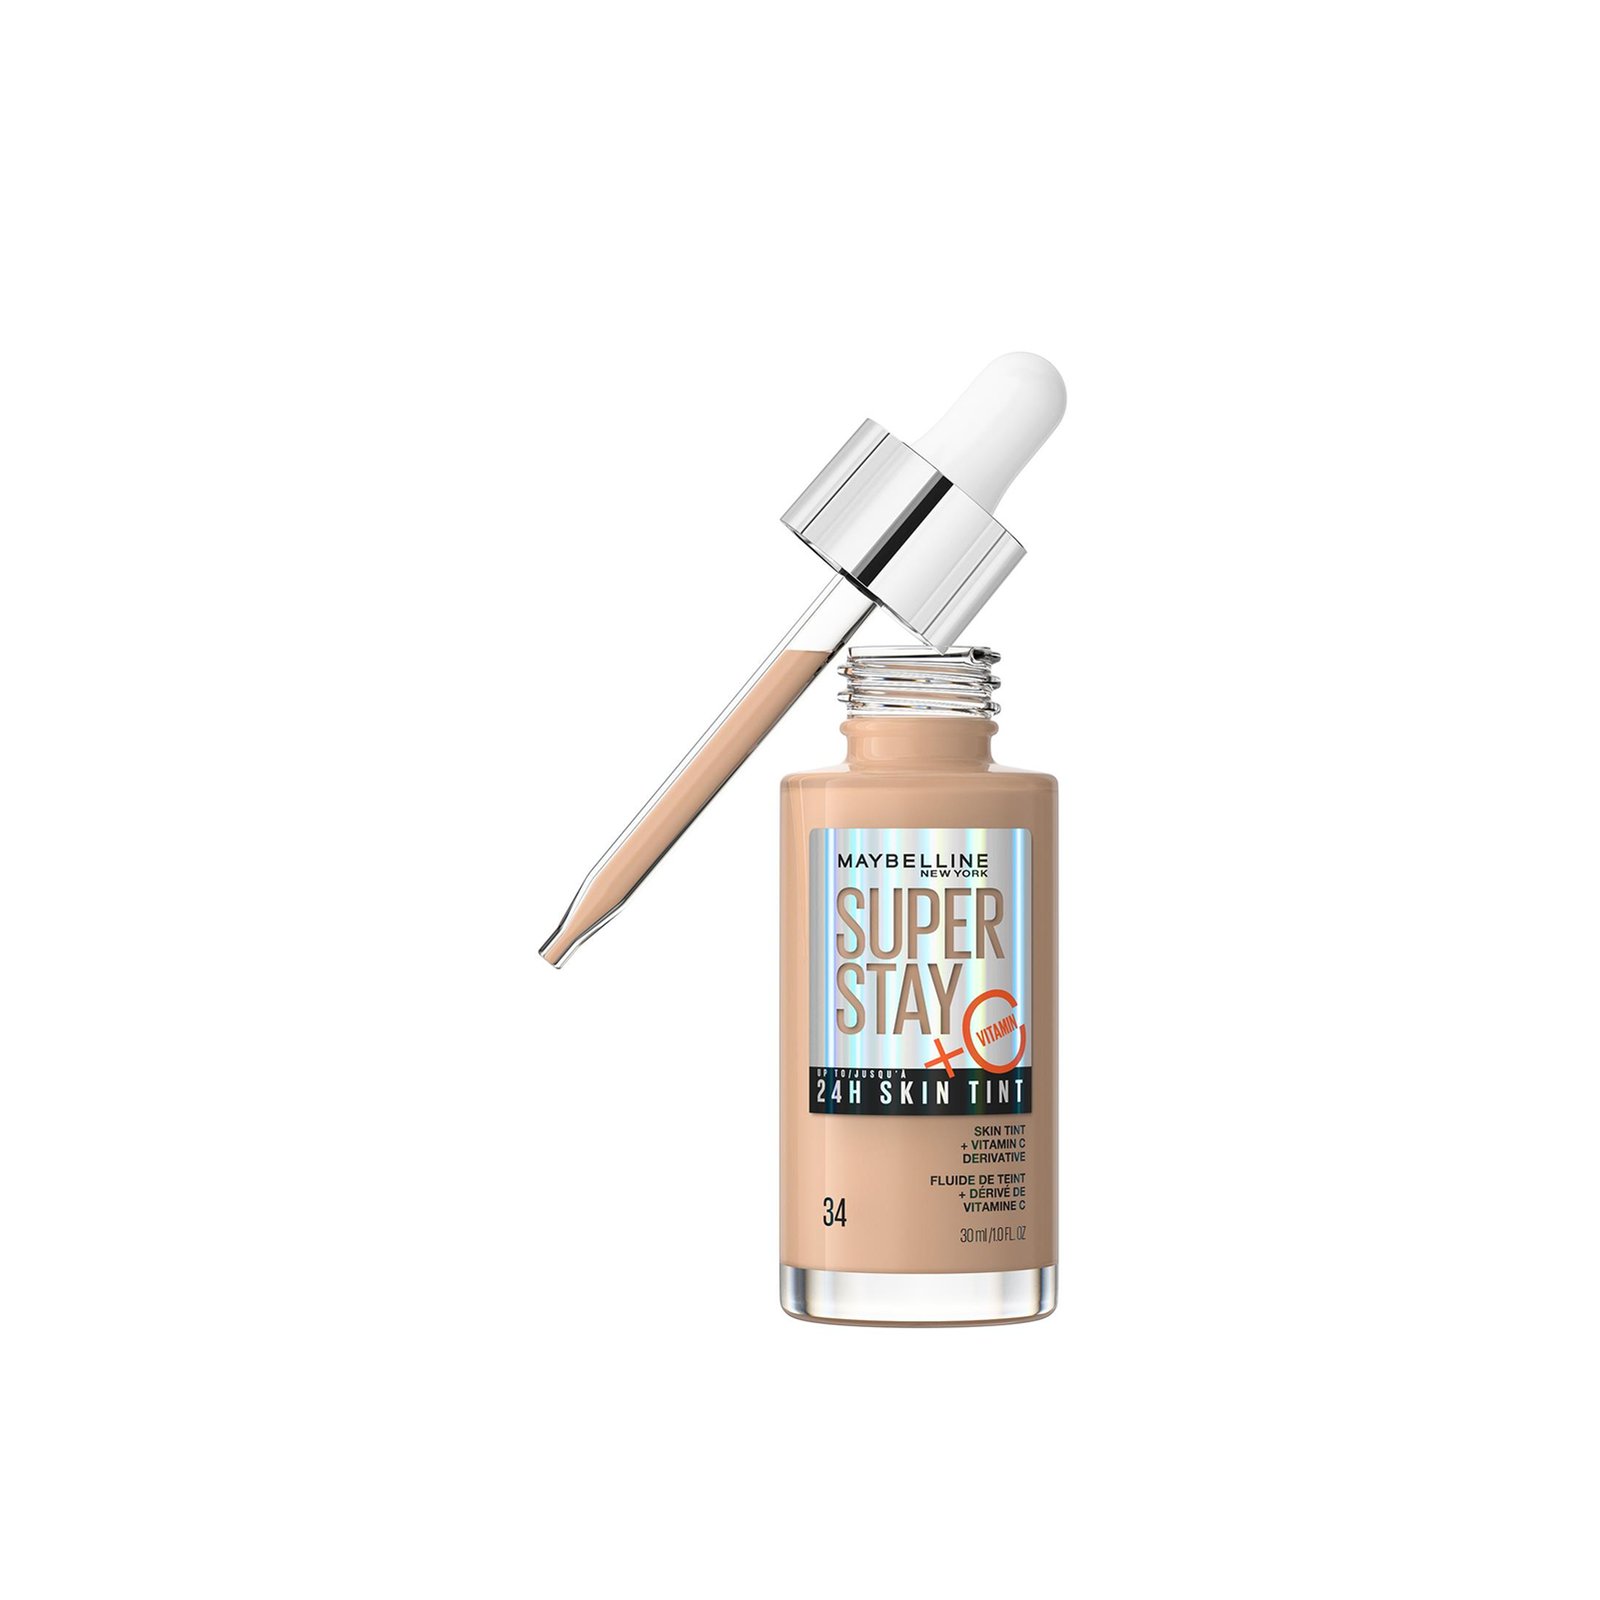 Maybelline Super Stay 24H Skin Tint Foundation 34 30ml